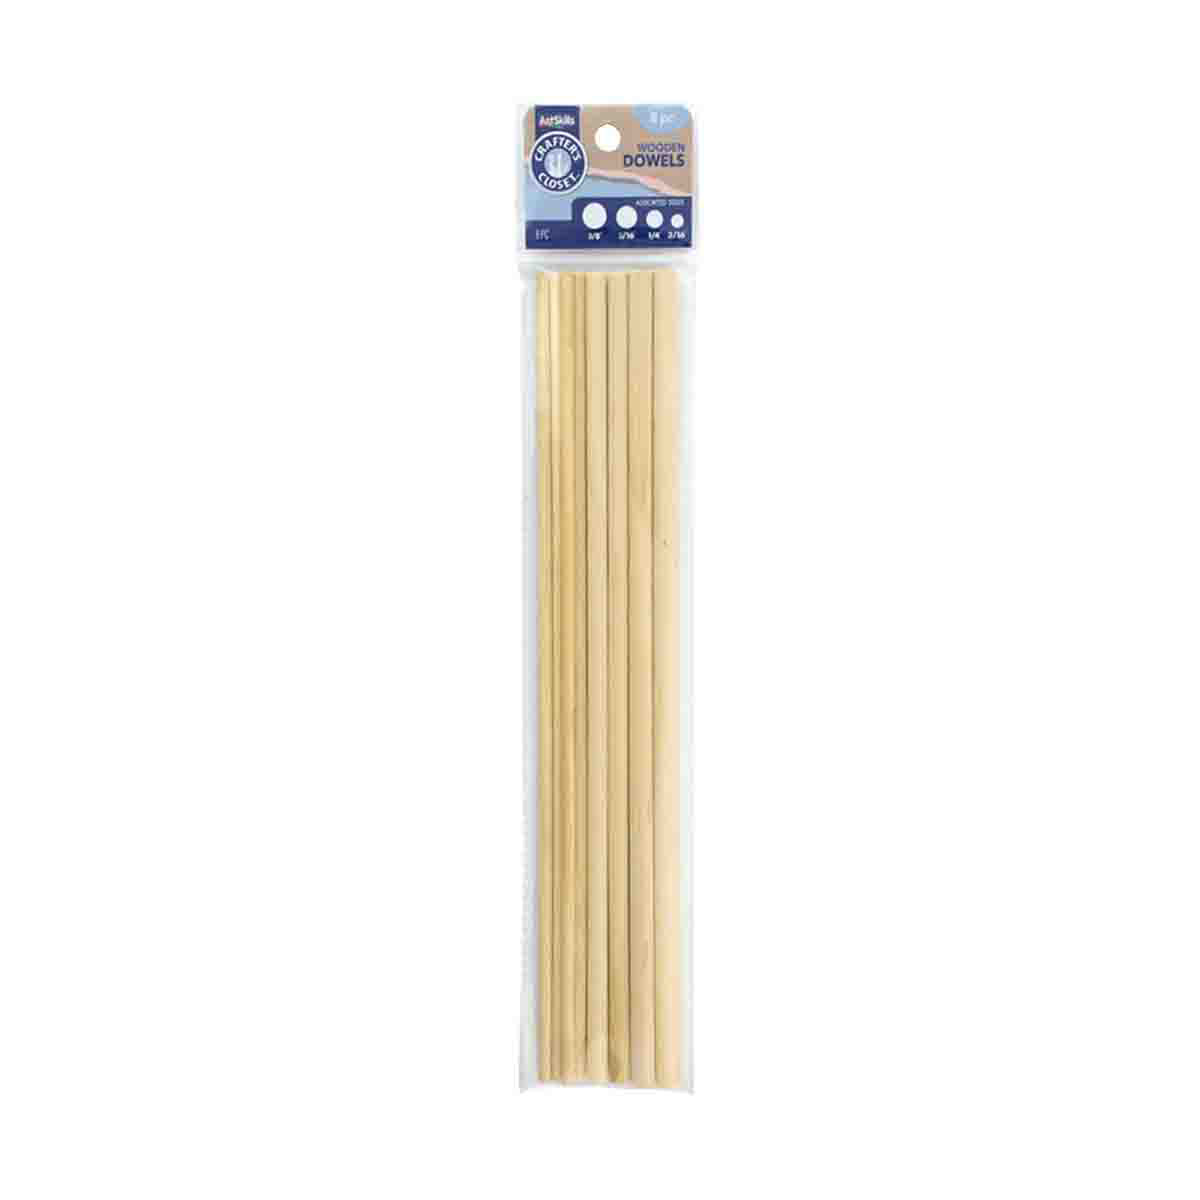 Crafter's Closet 12 Long Wooden Dowels for Crafts, Assorted Widths 3/16,  1/4, 5/16, 3/8, 8 Pieces